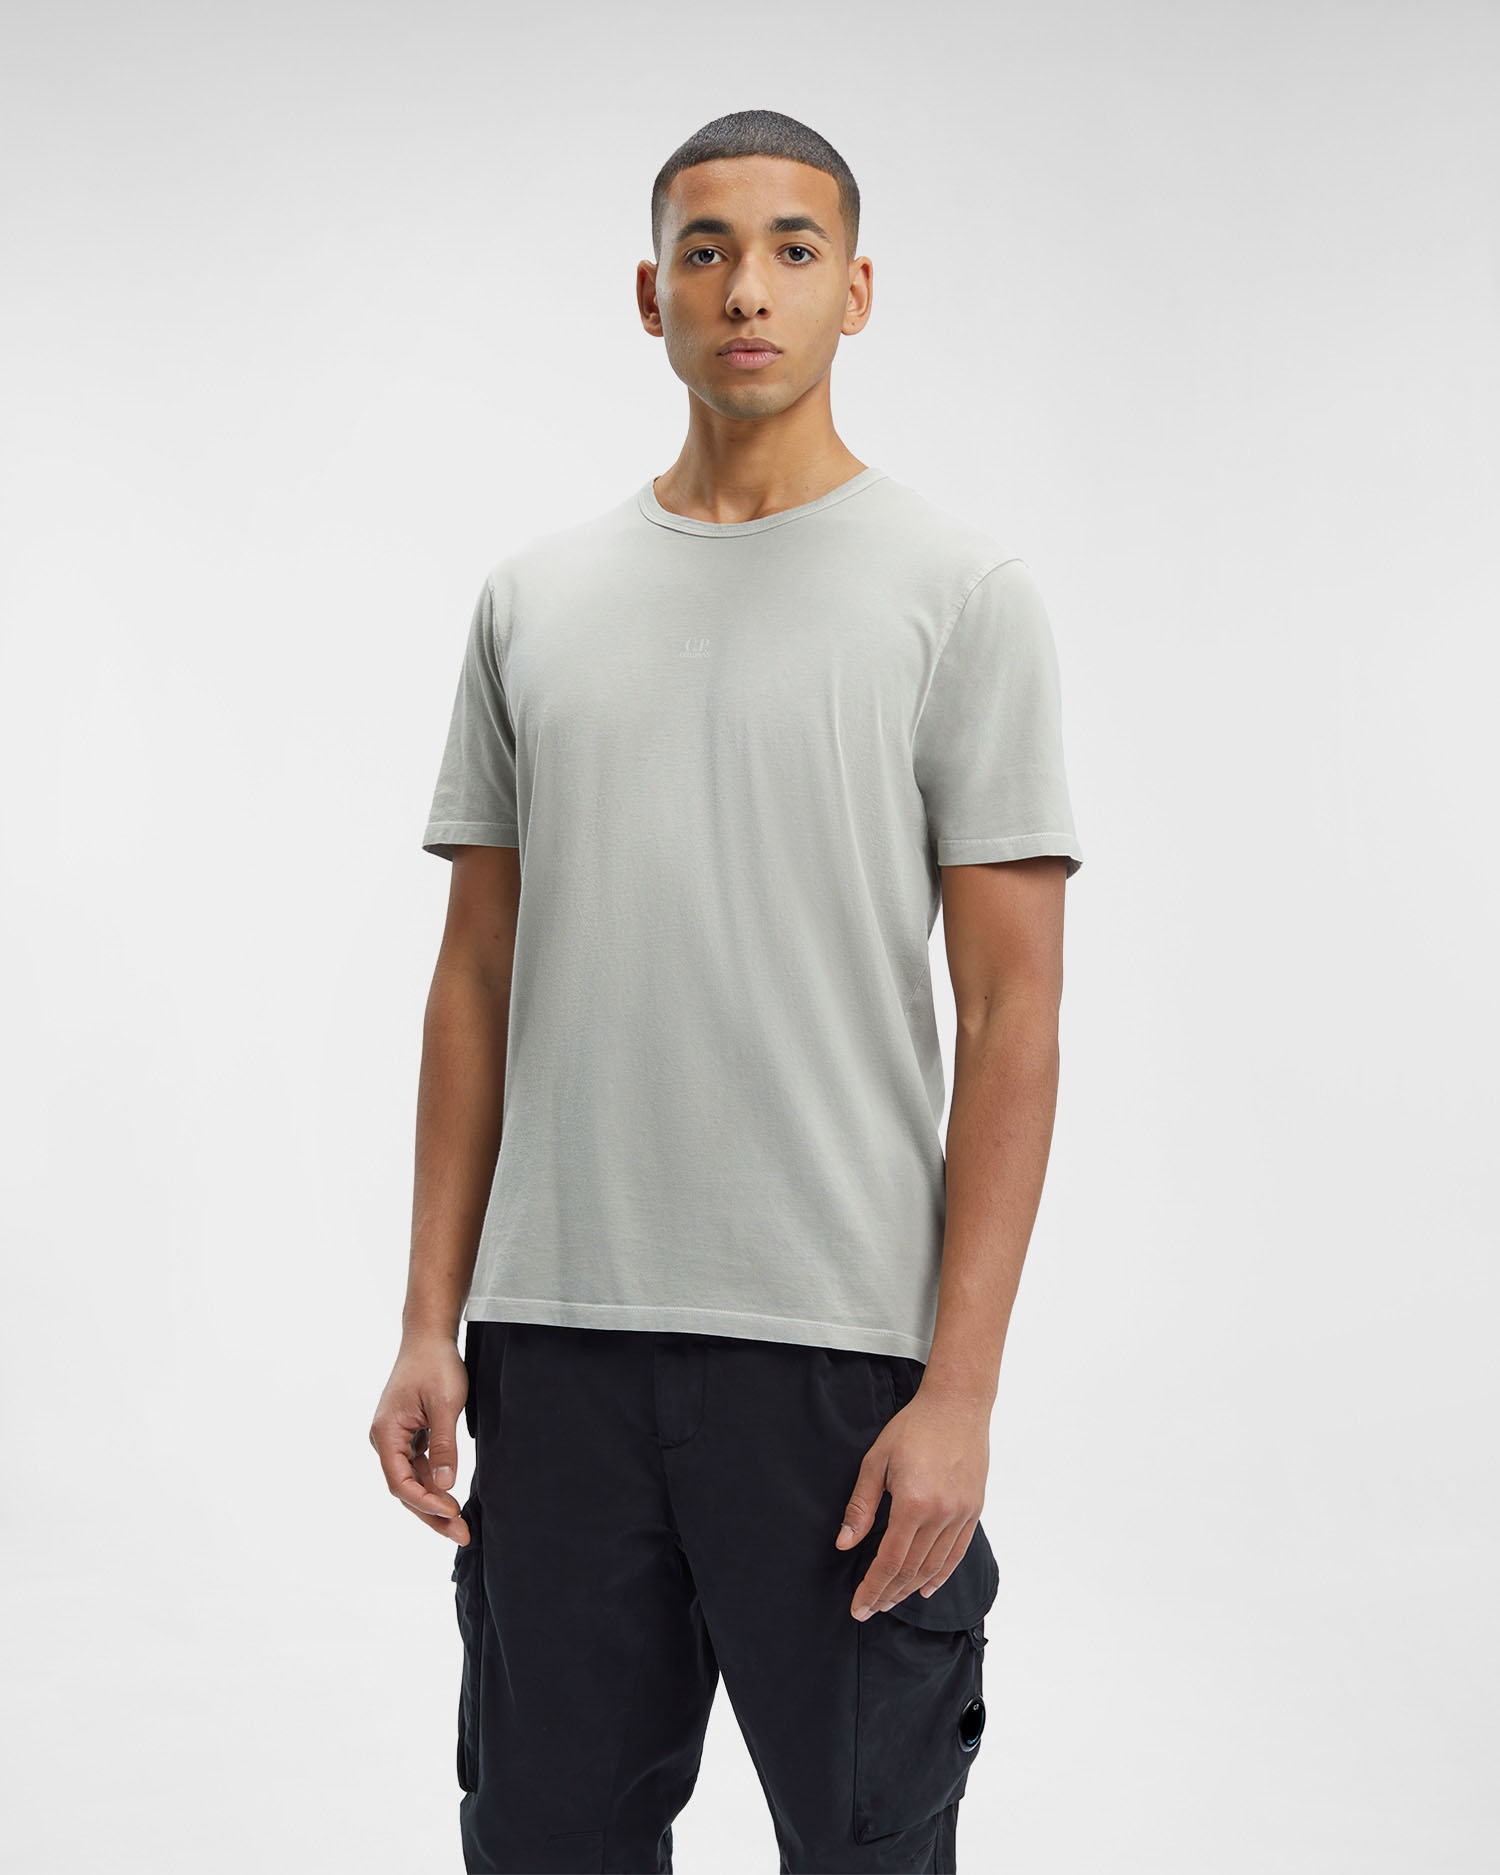 24/1 Jersey Relaxed Resist Dyed T-shirt | C.P. Company Online Store | T-Shirts